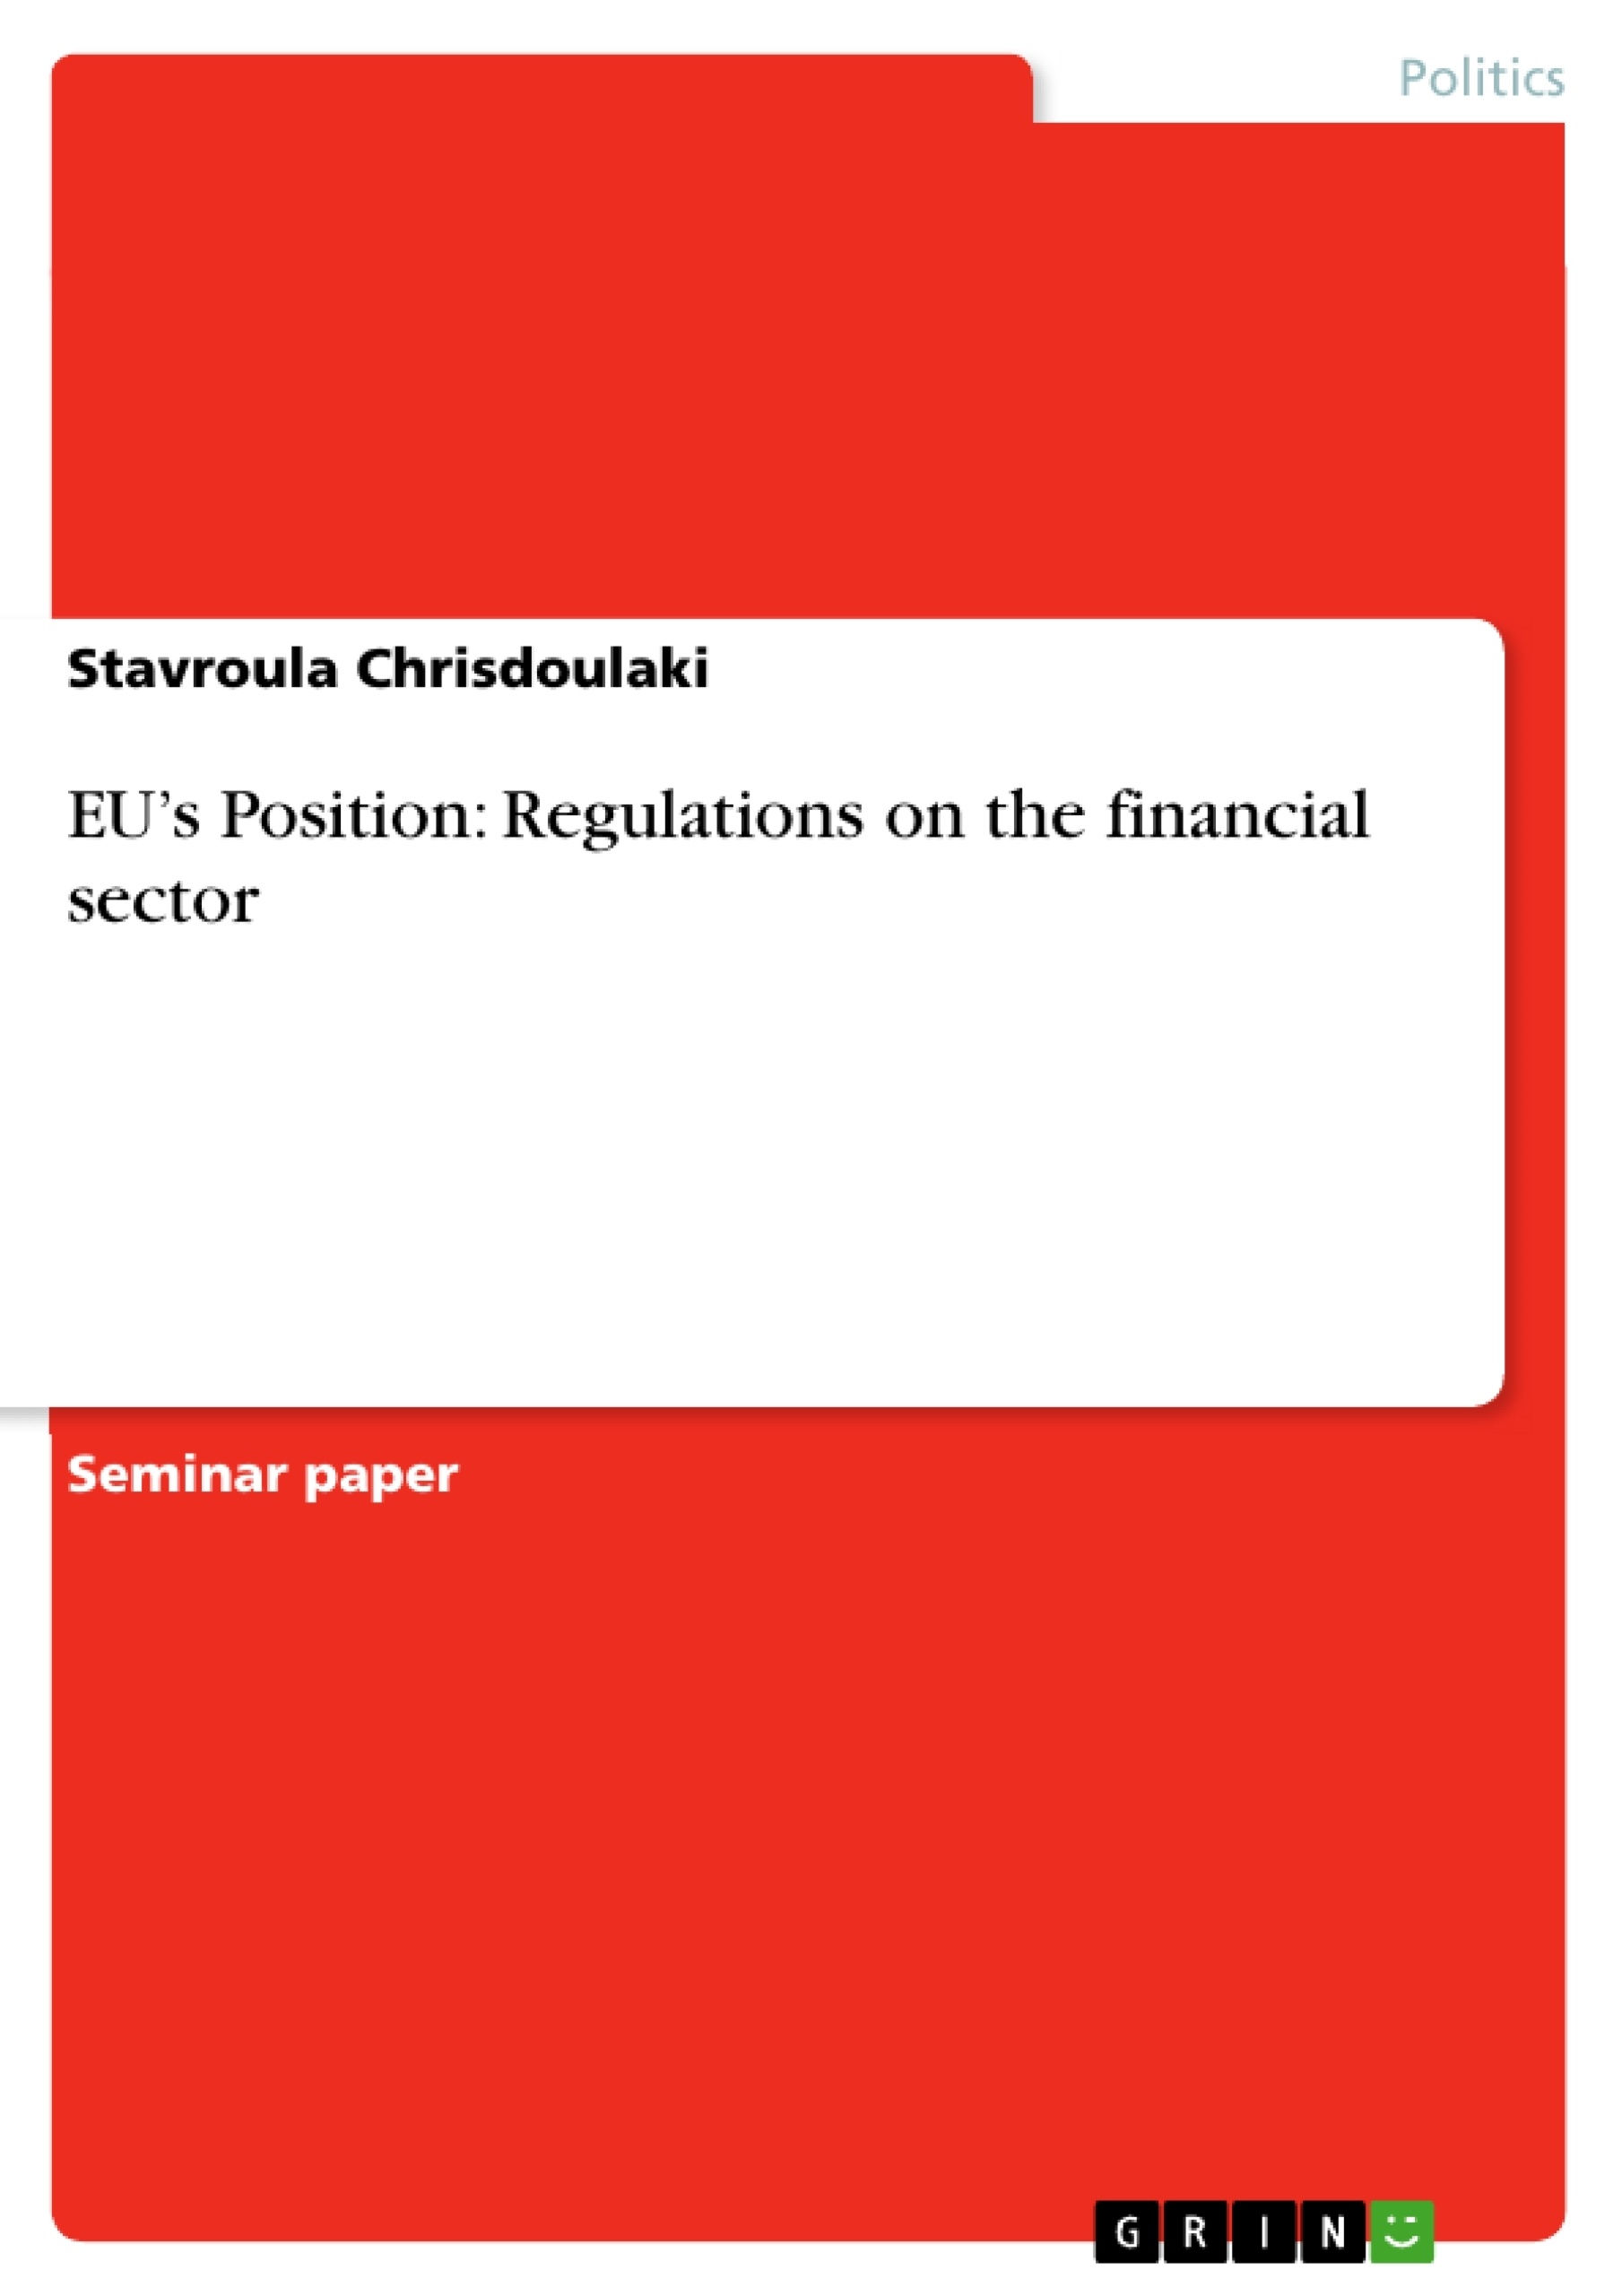 Title: EU’s Position: Regulations on the financial sector